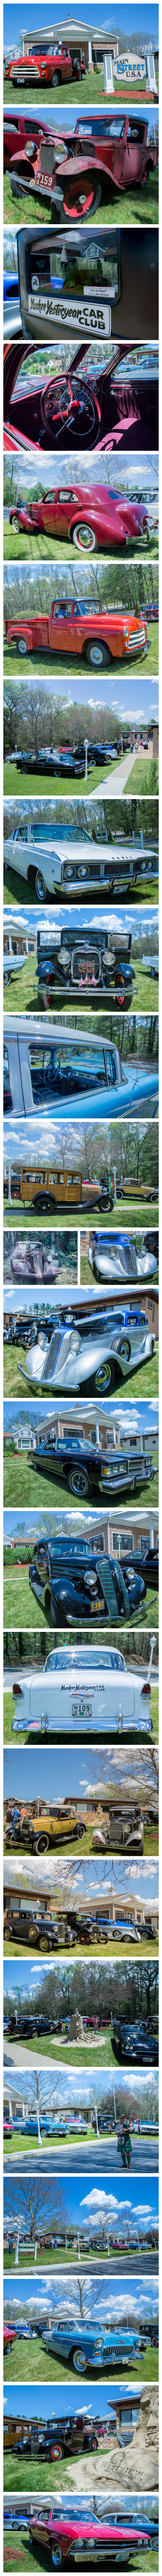 image of the Yankee Yesteryear Car Club at Westview